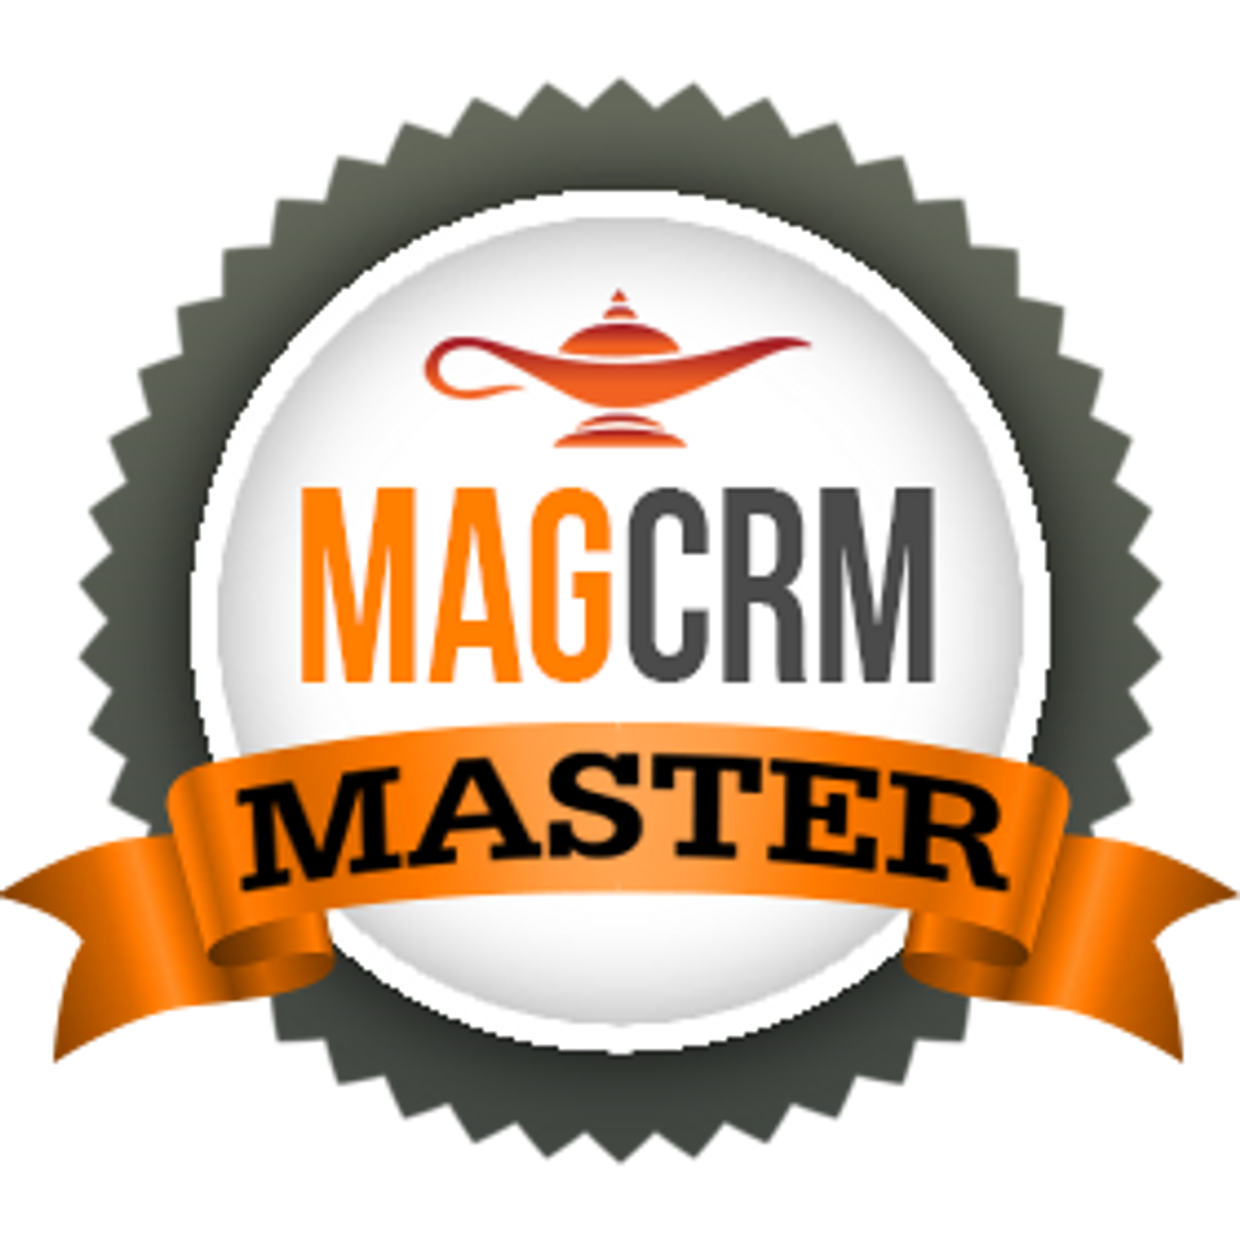 MAGCRM MASTER
You earned this badge for completing Automation on 10/04/2022